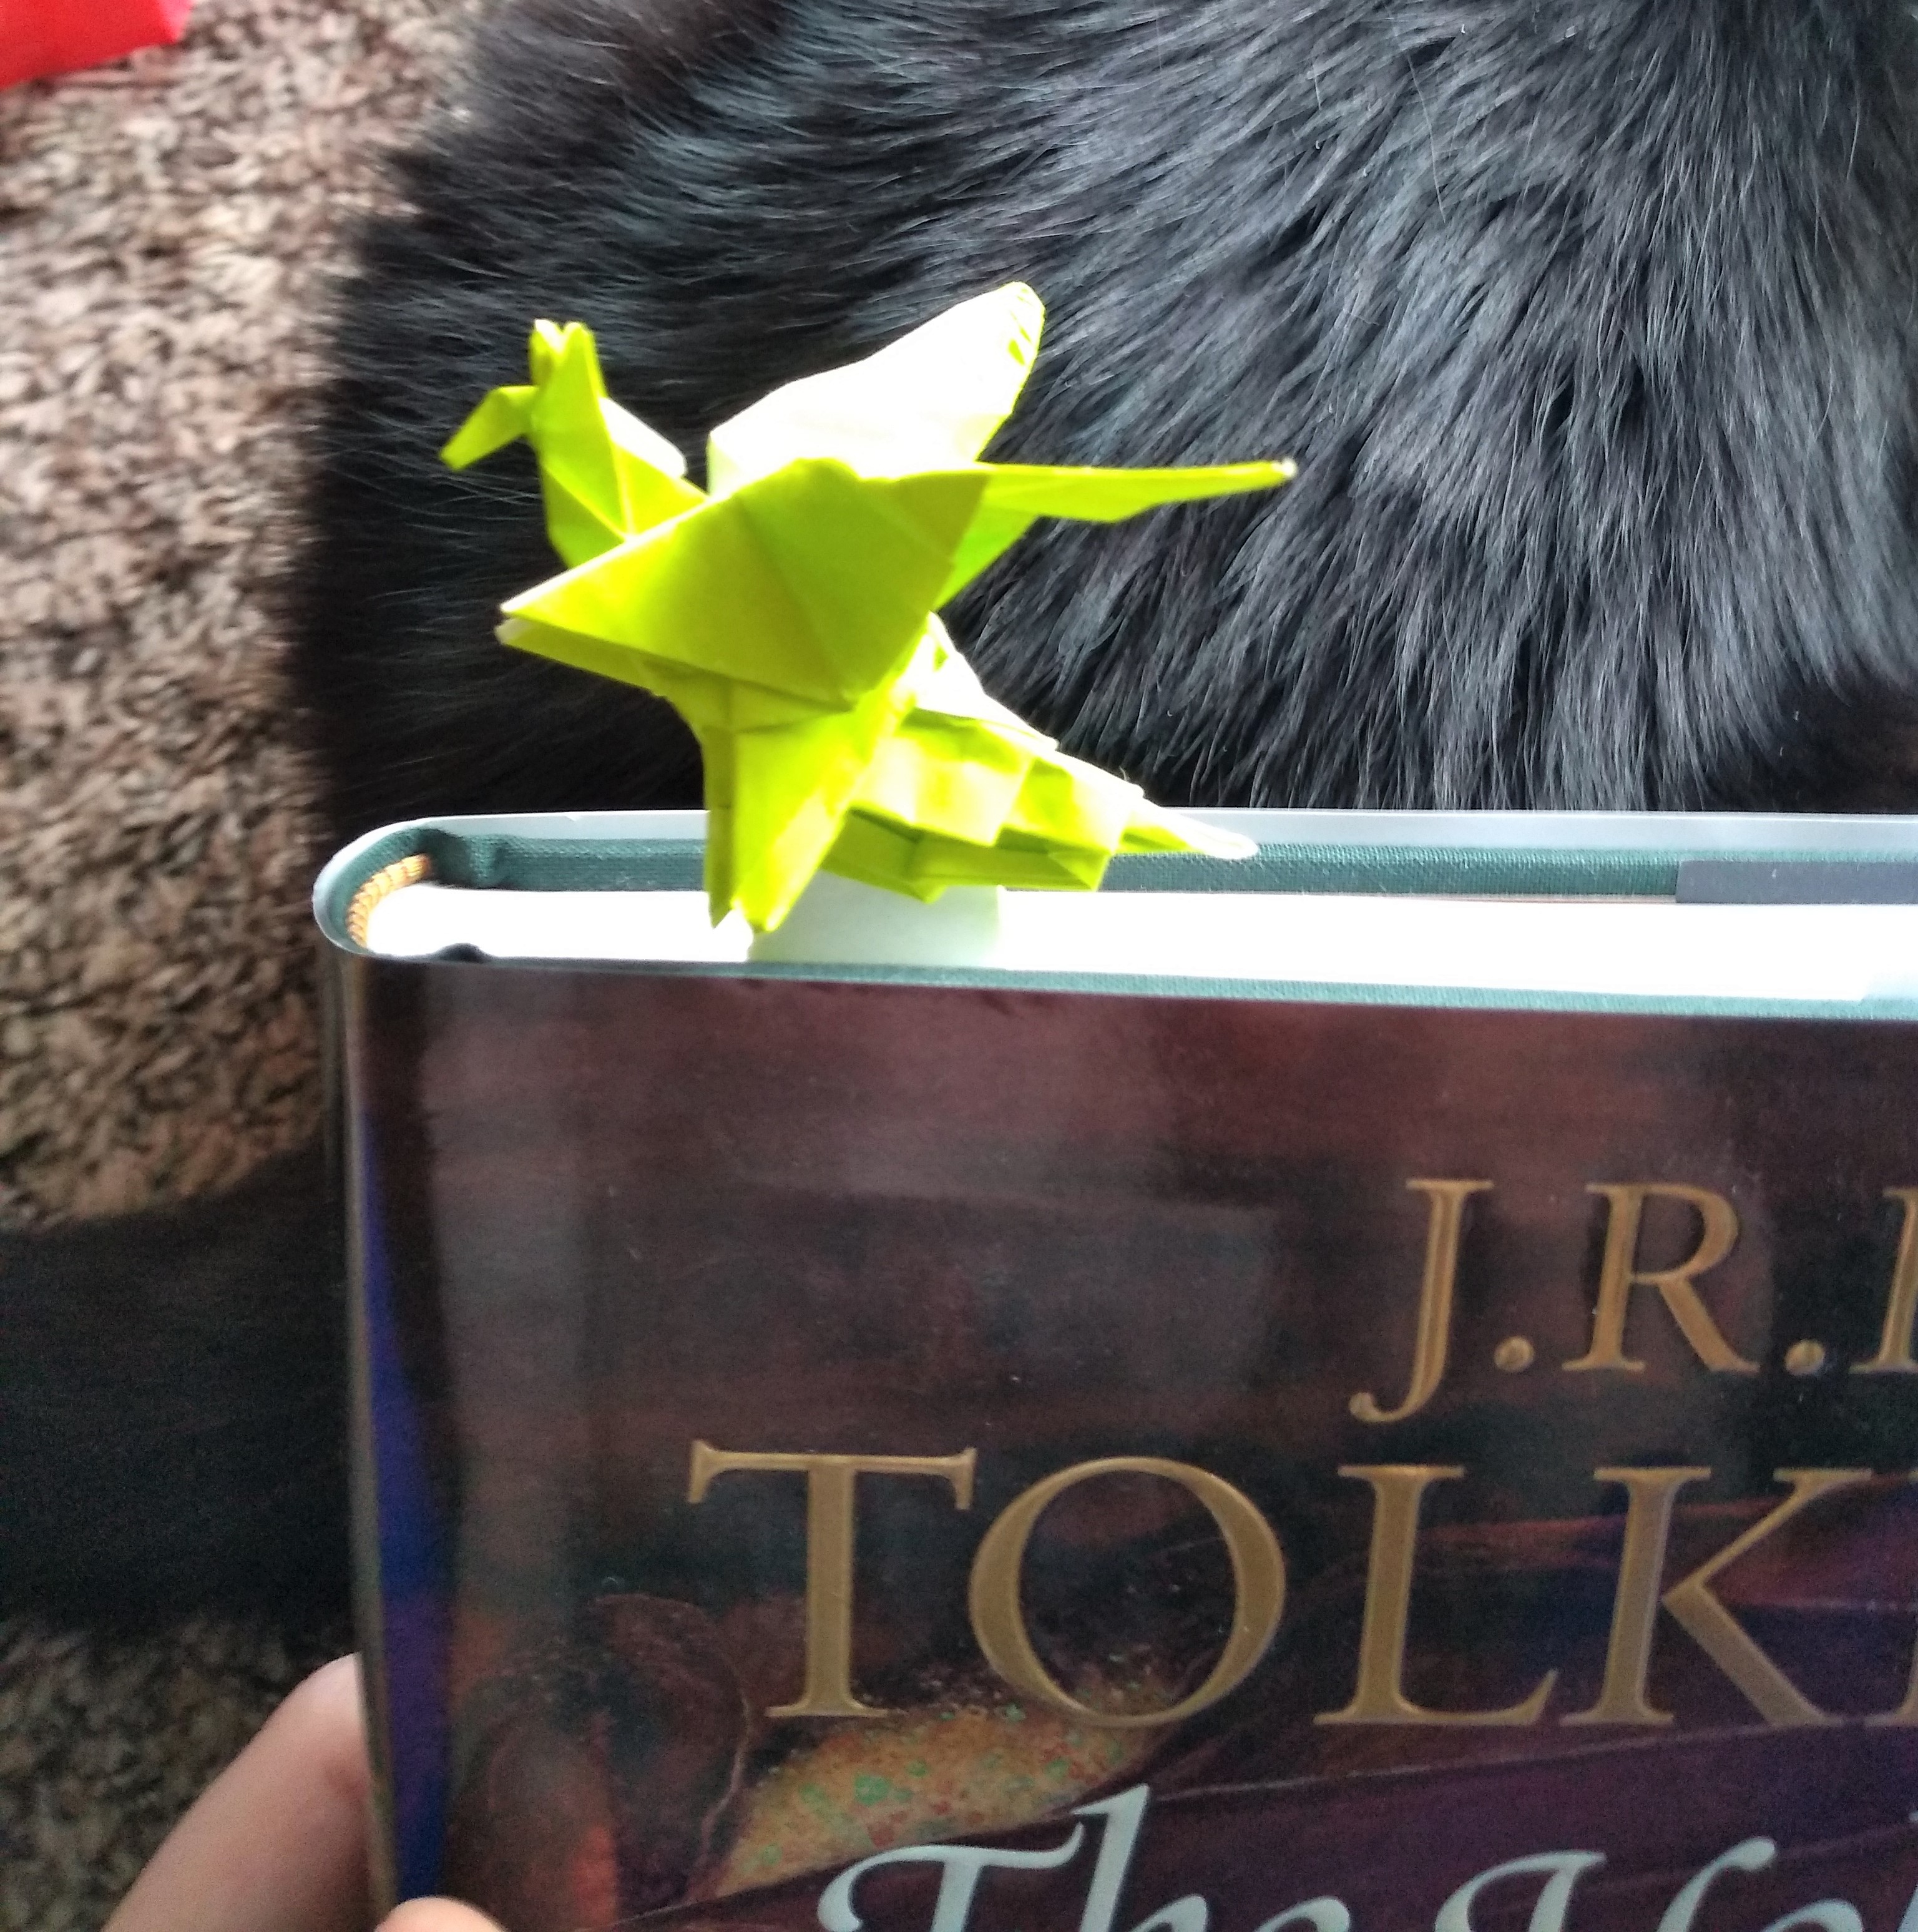 A green dragon bookmark inserted in The Hobbit.